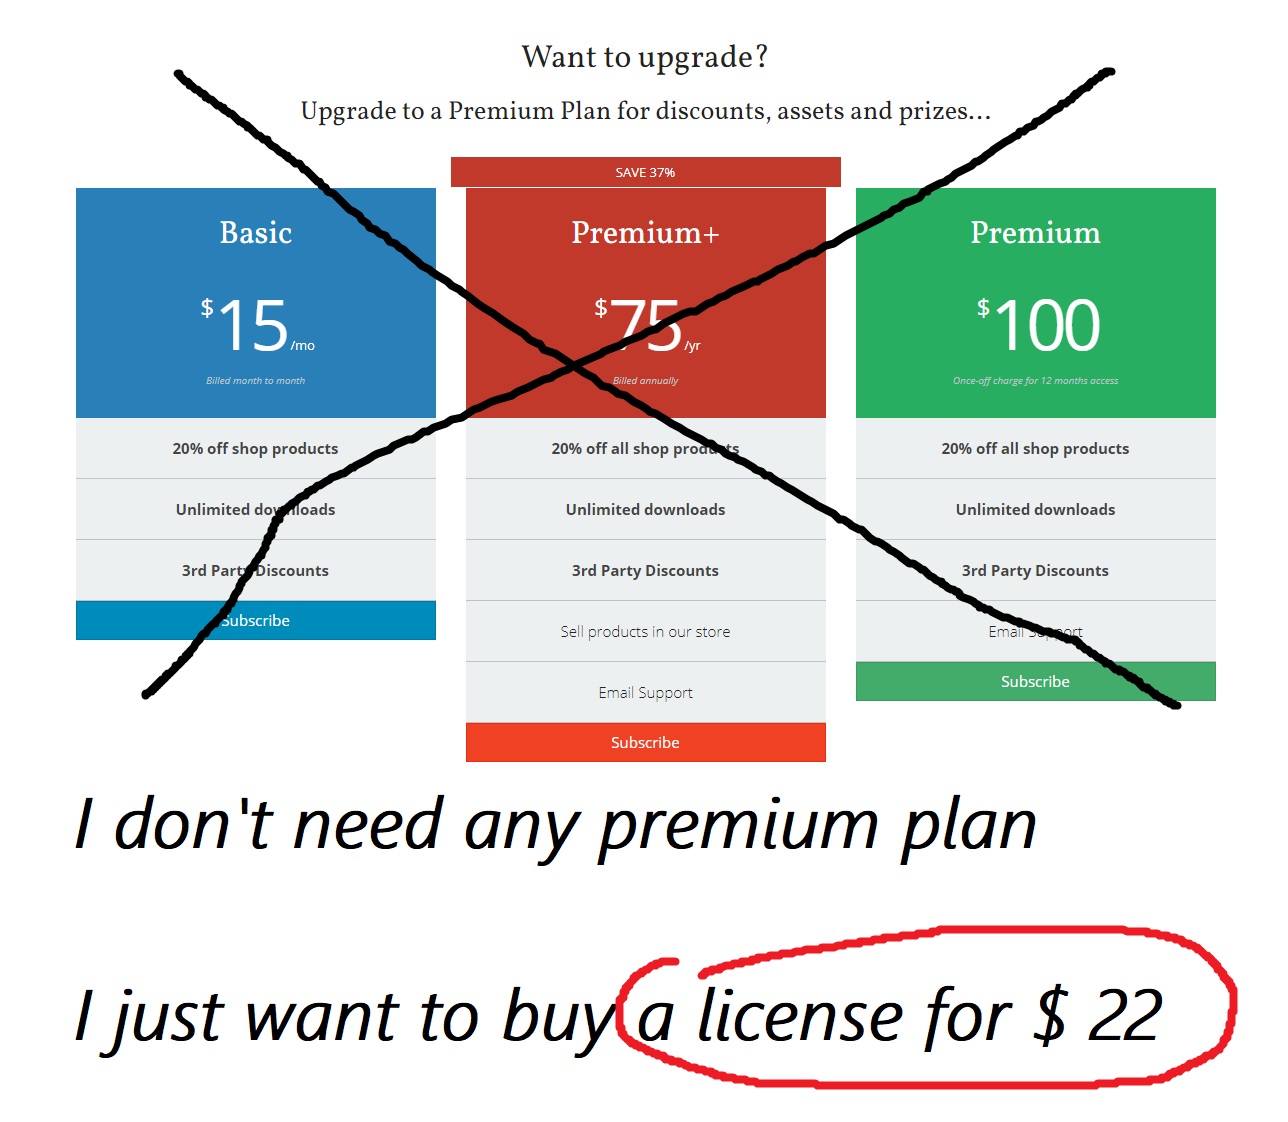 I don't need a premium, I want to buy for $ 22